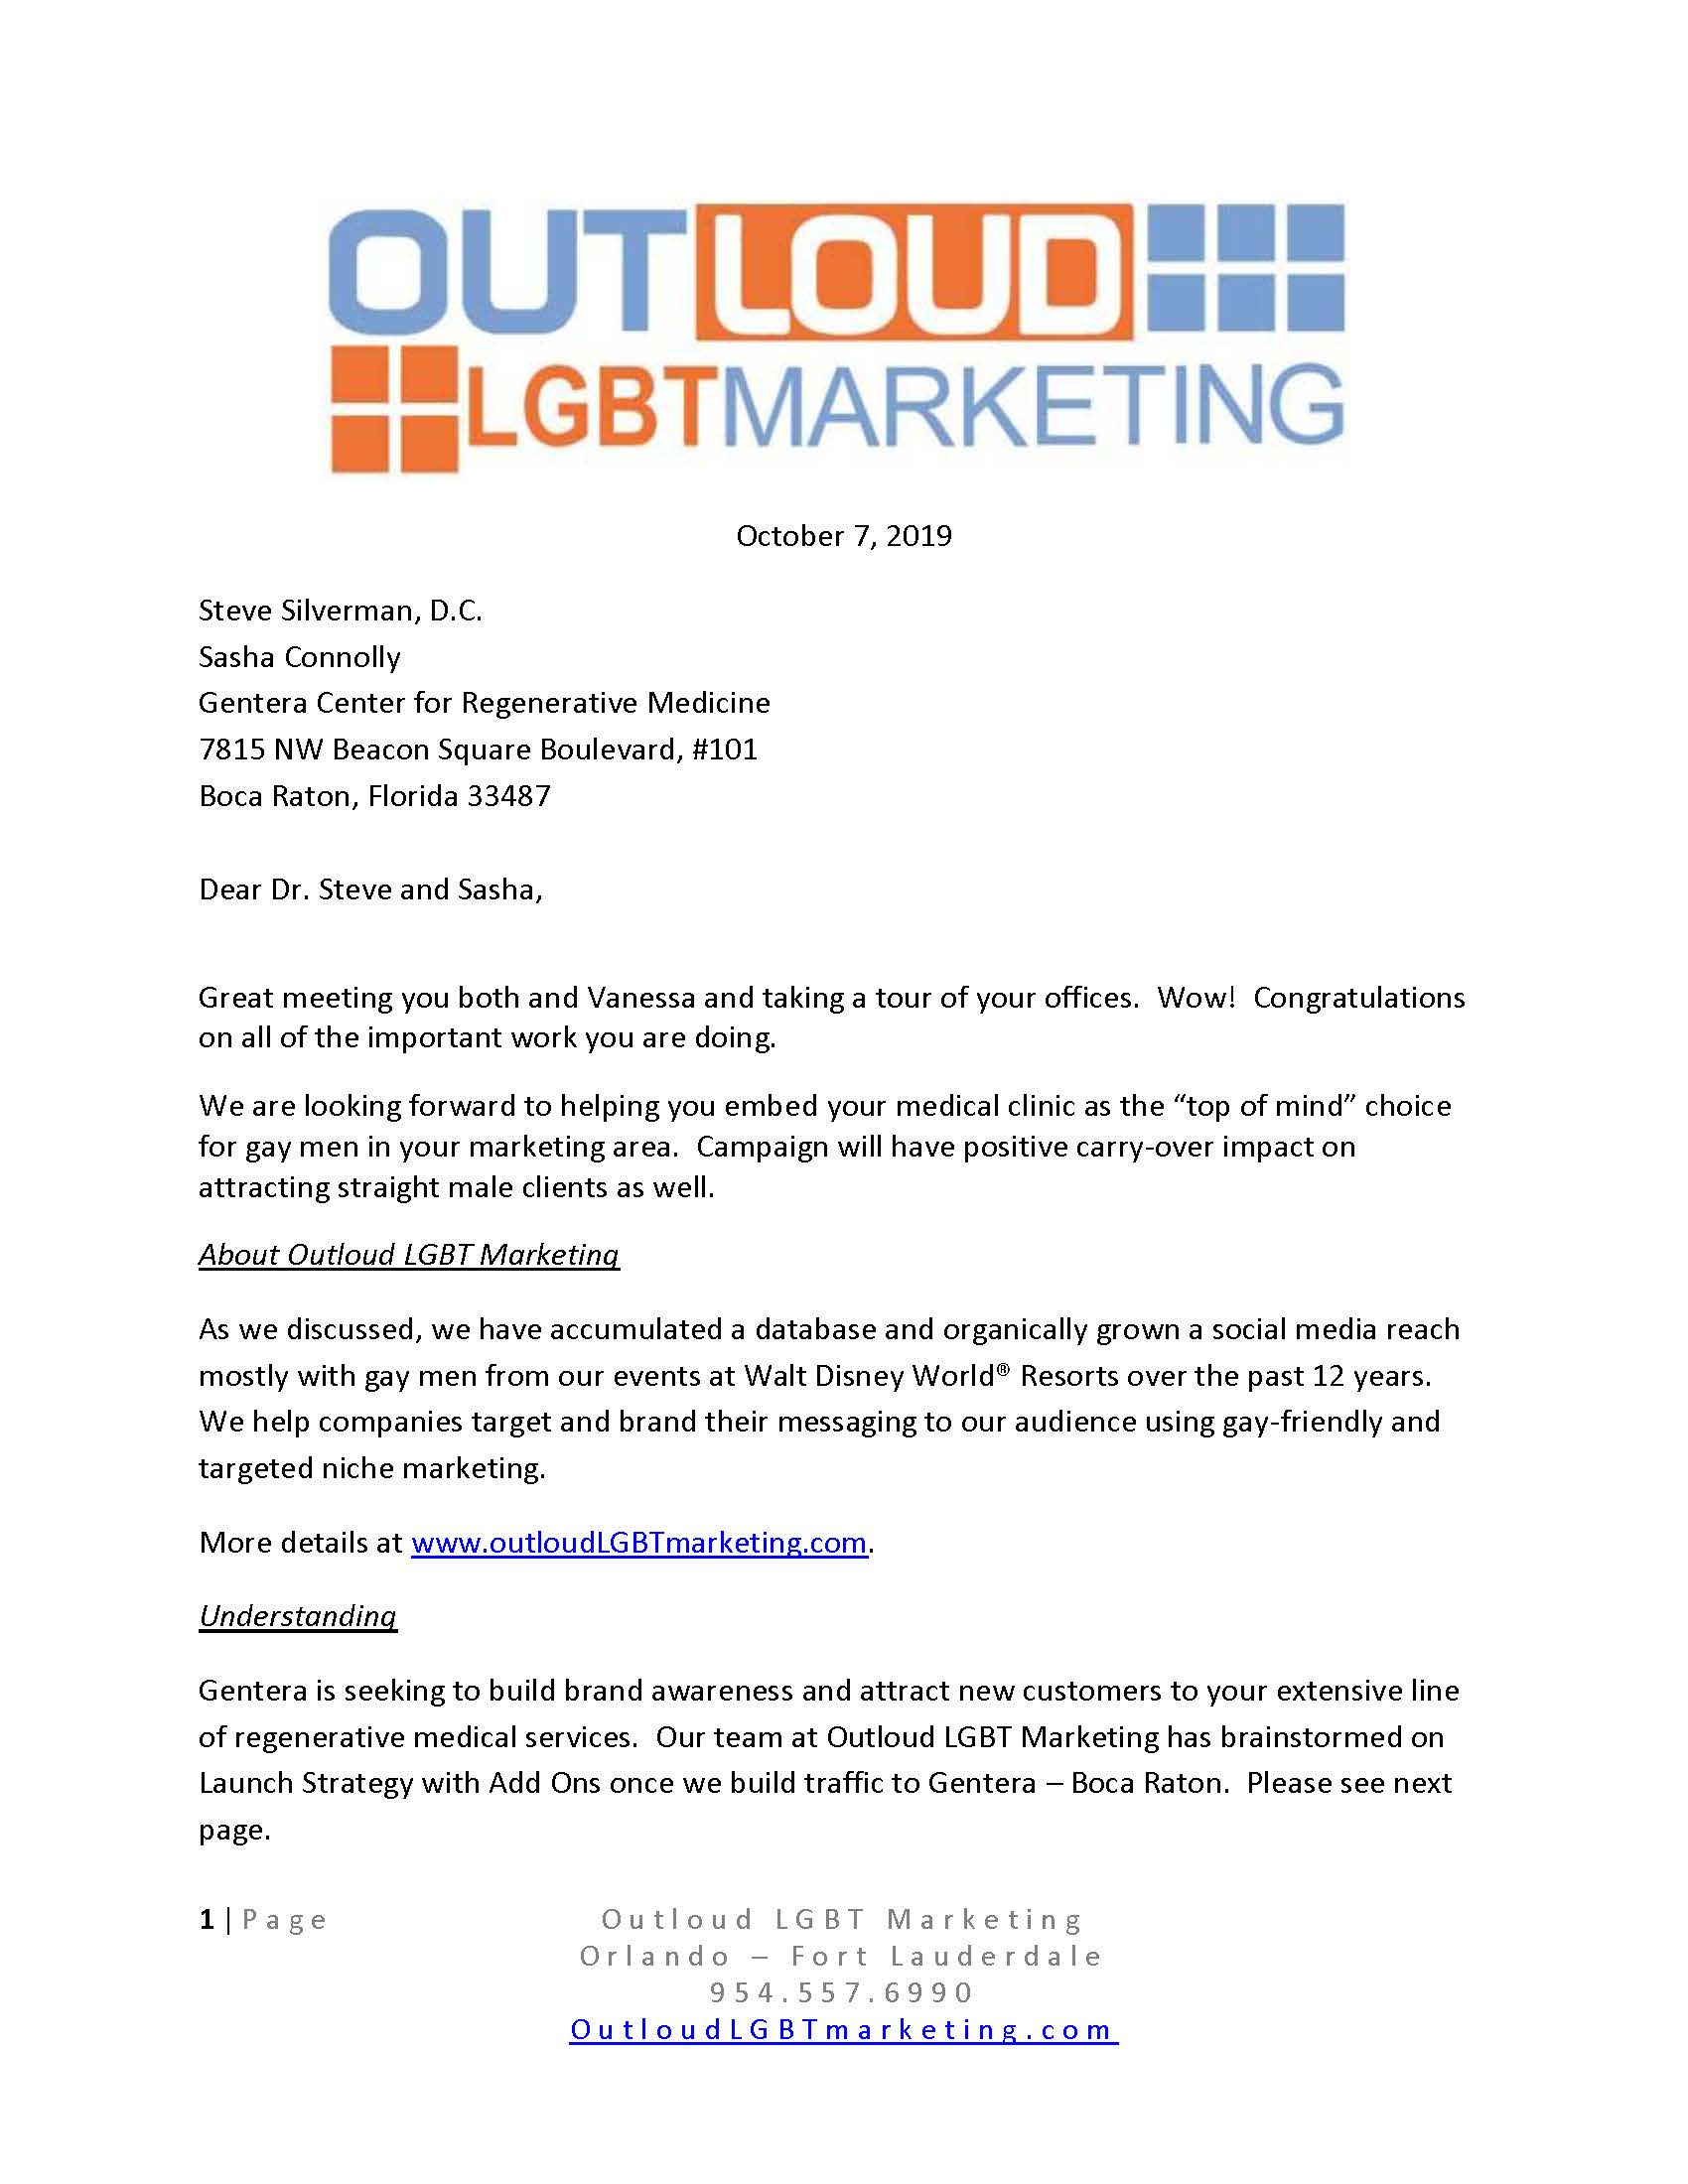 Outloud LGBT Marketing Proposal for GenteraMed as fo 10-06-19_Page_1